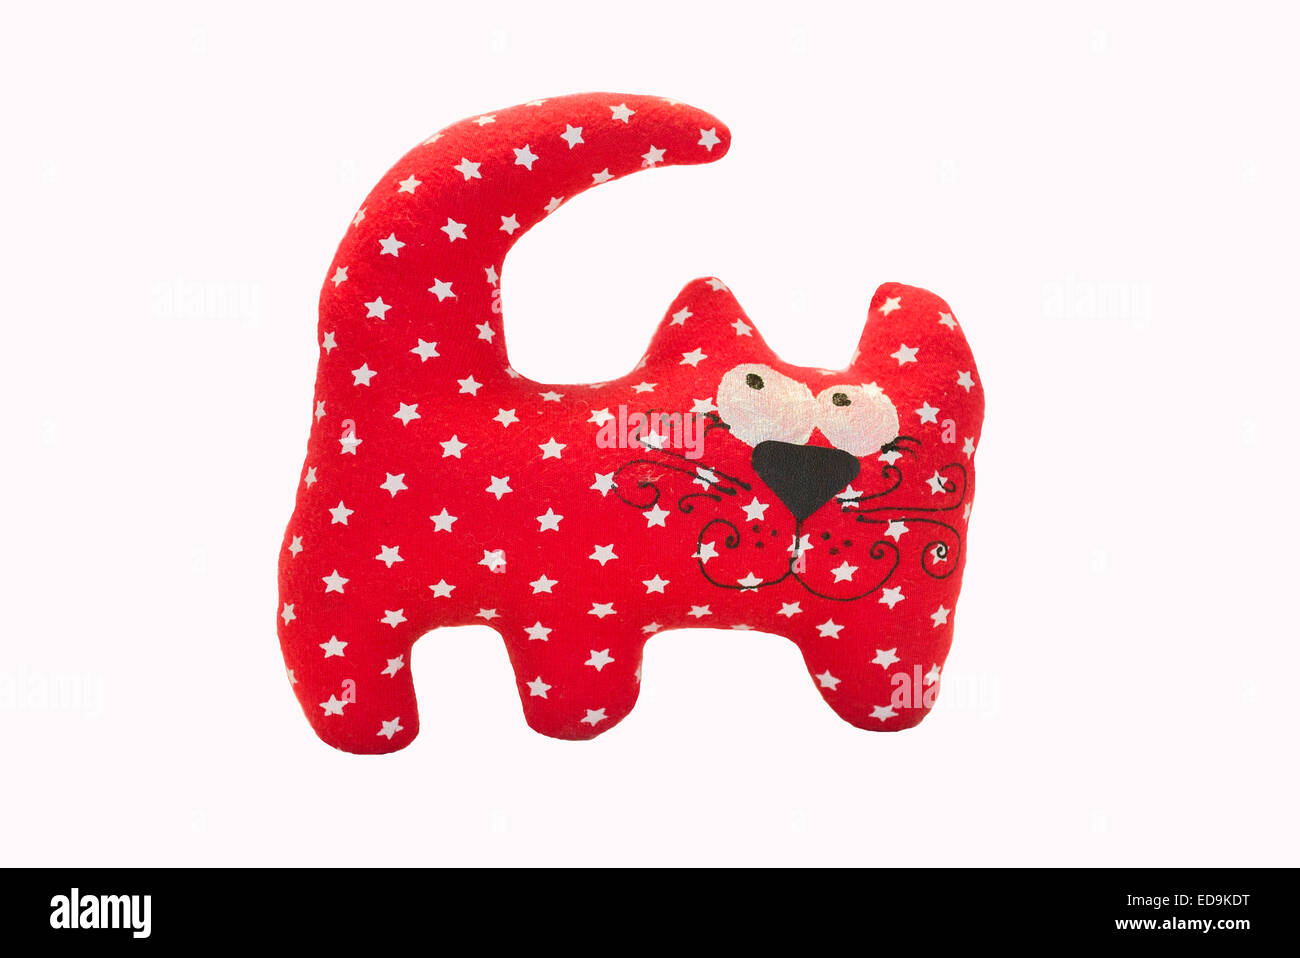 Red cat toy on a white background Stock Photo